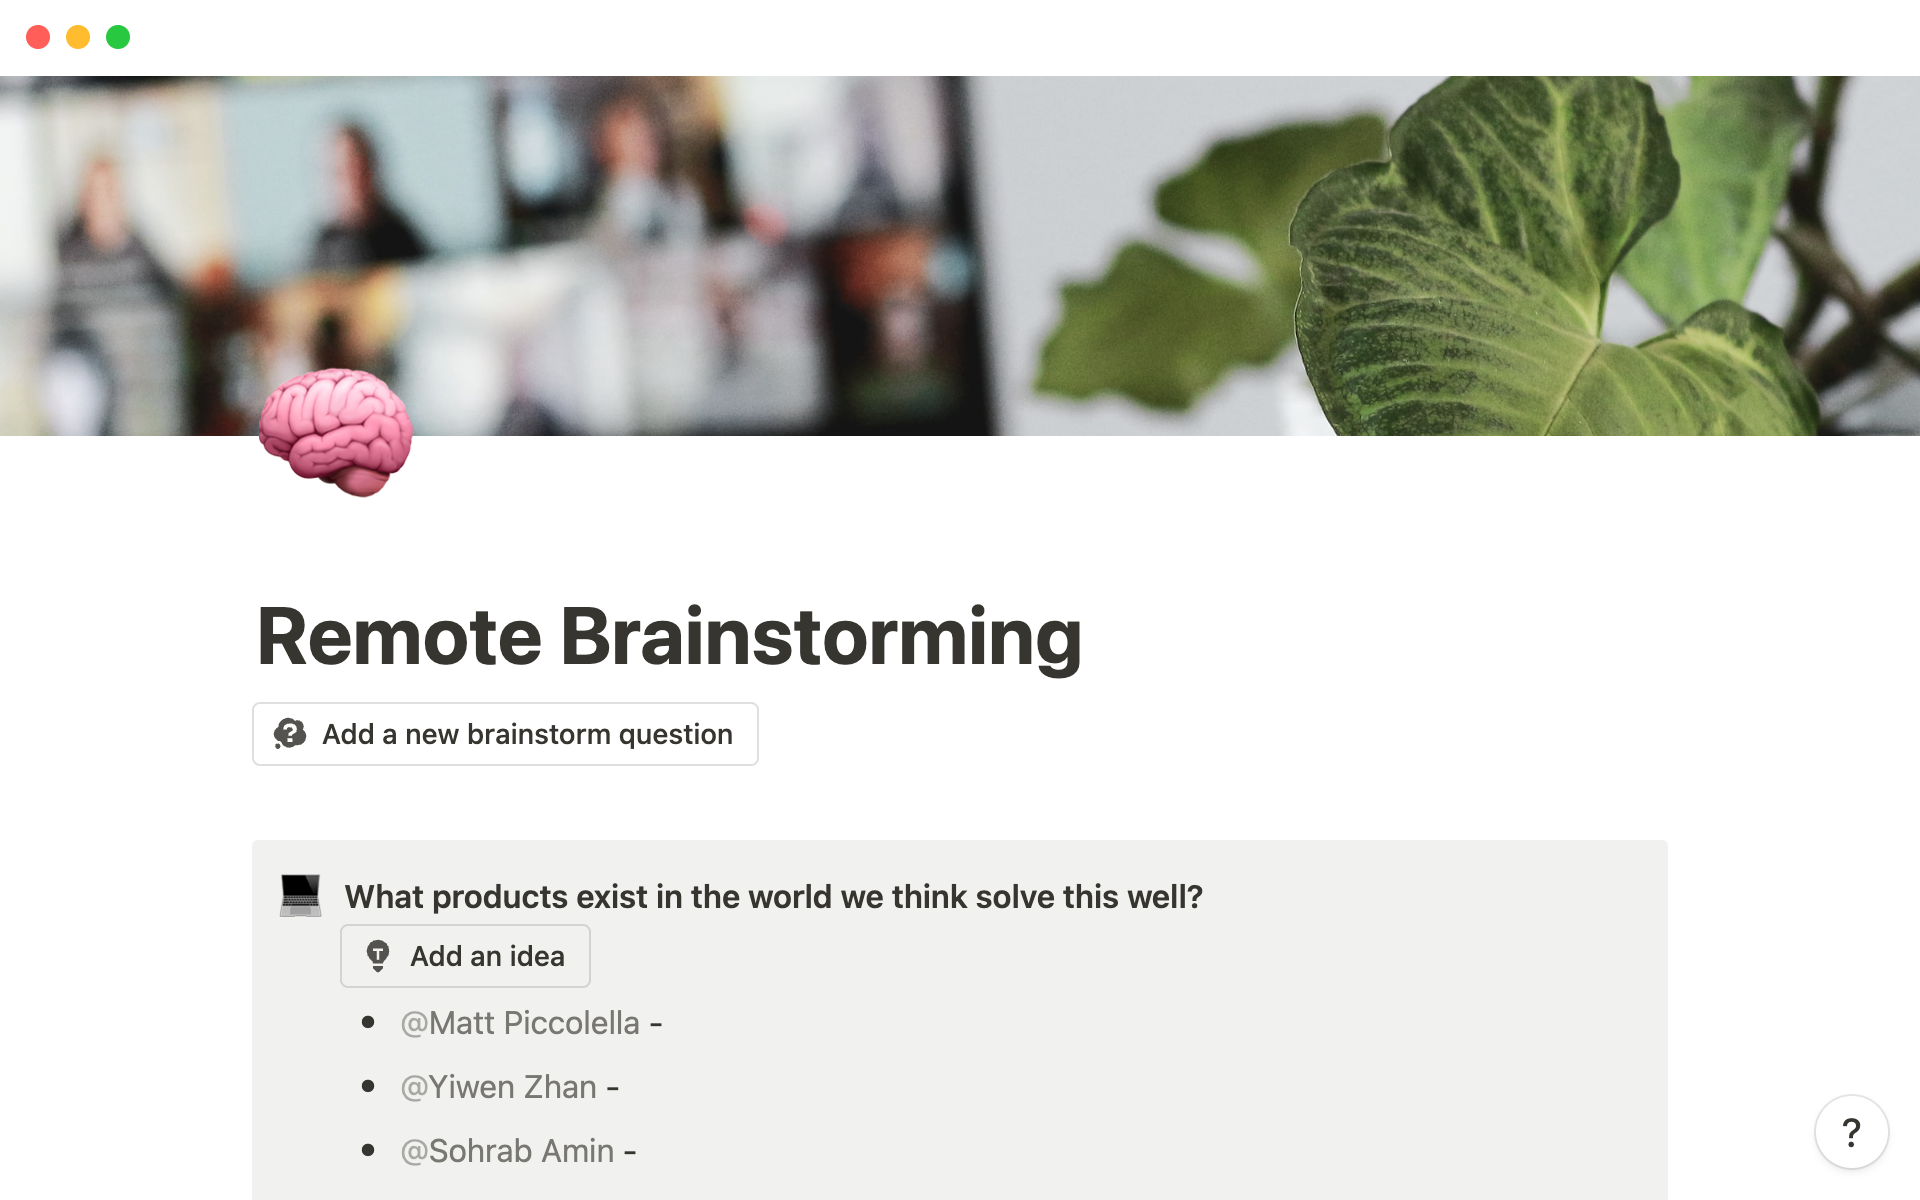 Rock your next brainstorming session with Notion